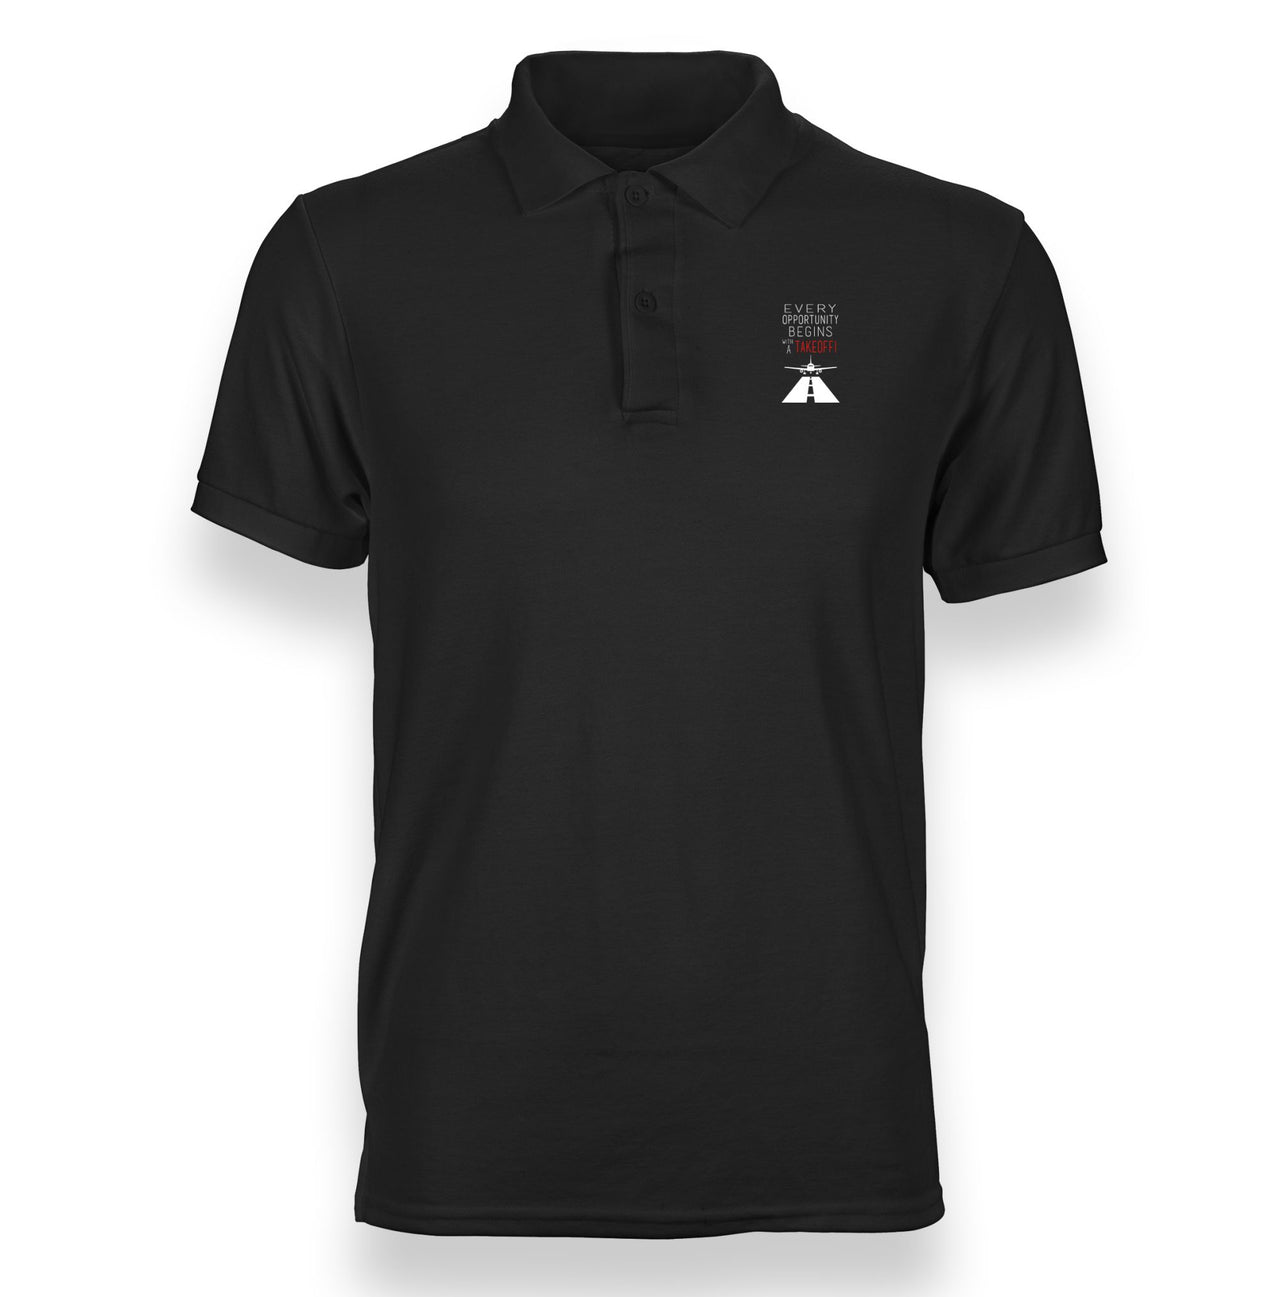 Every Opportunity Designed "WOMEN" Polo T-Shirts